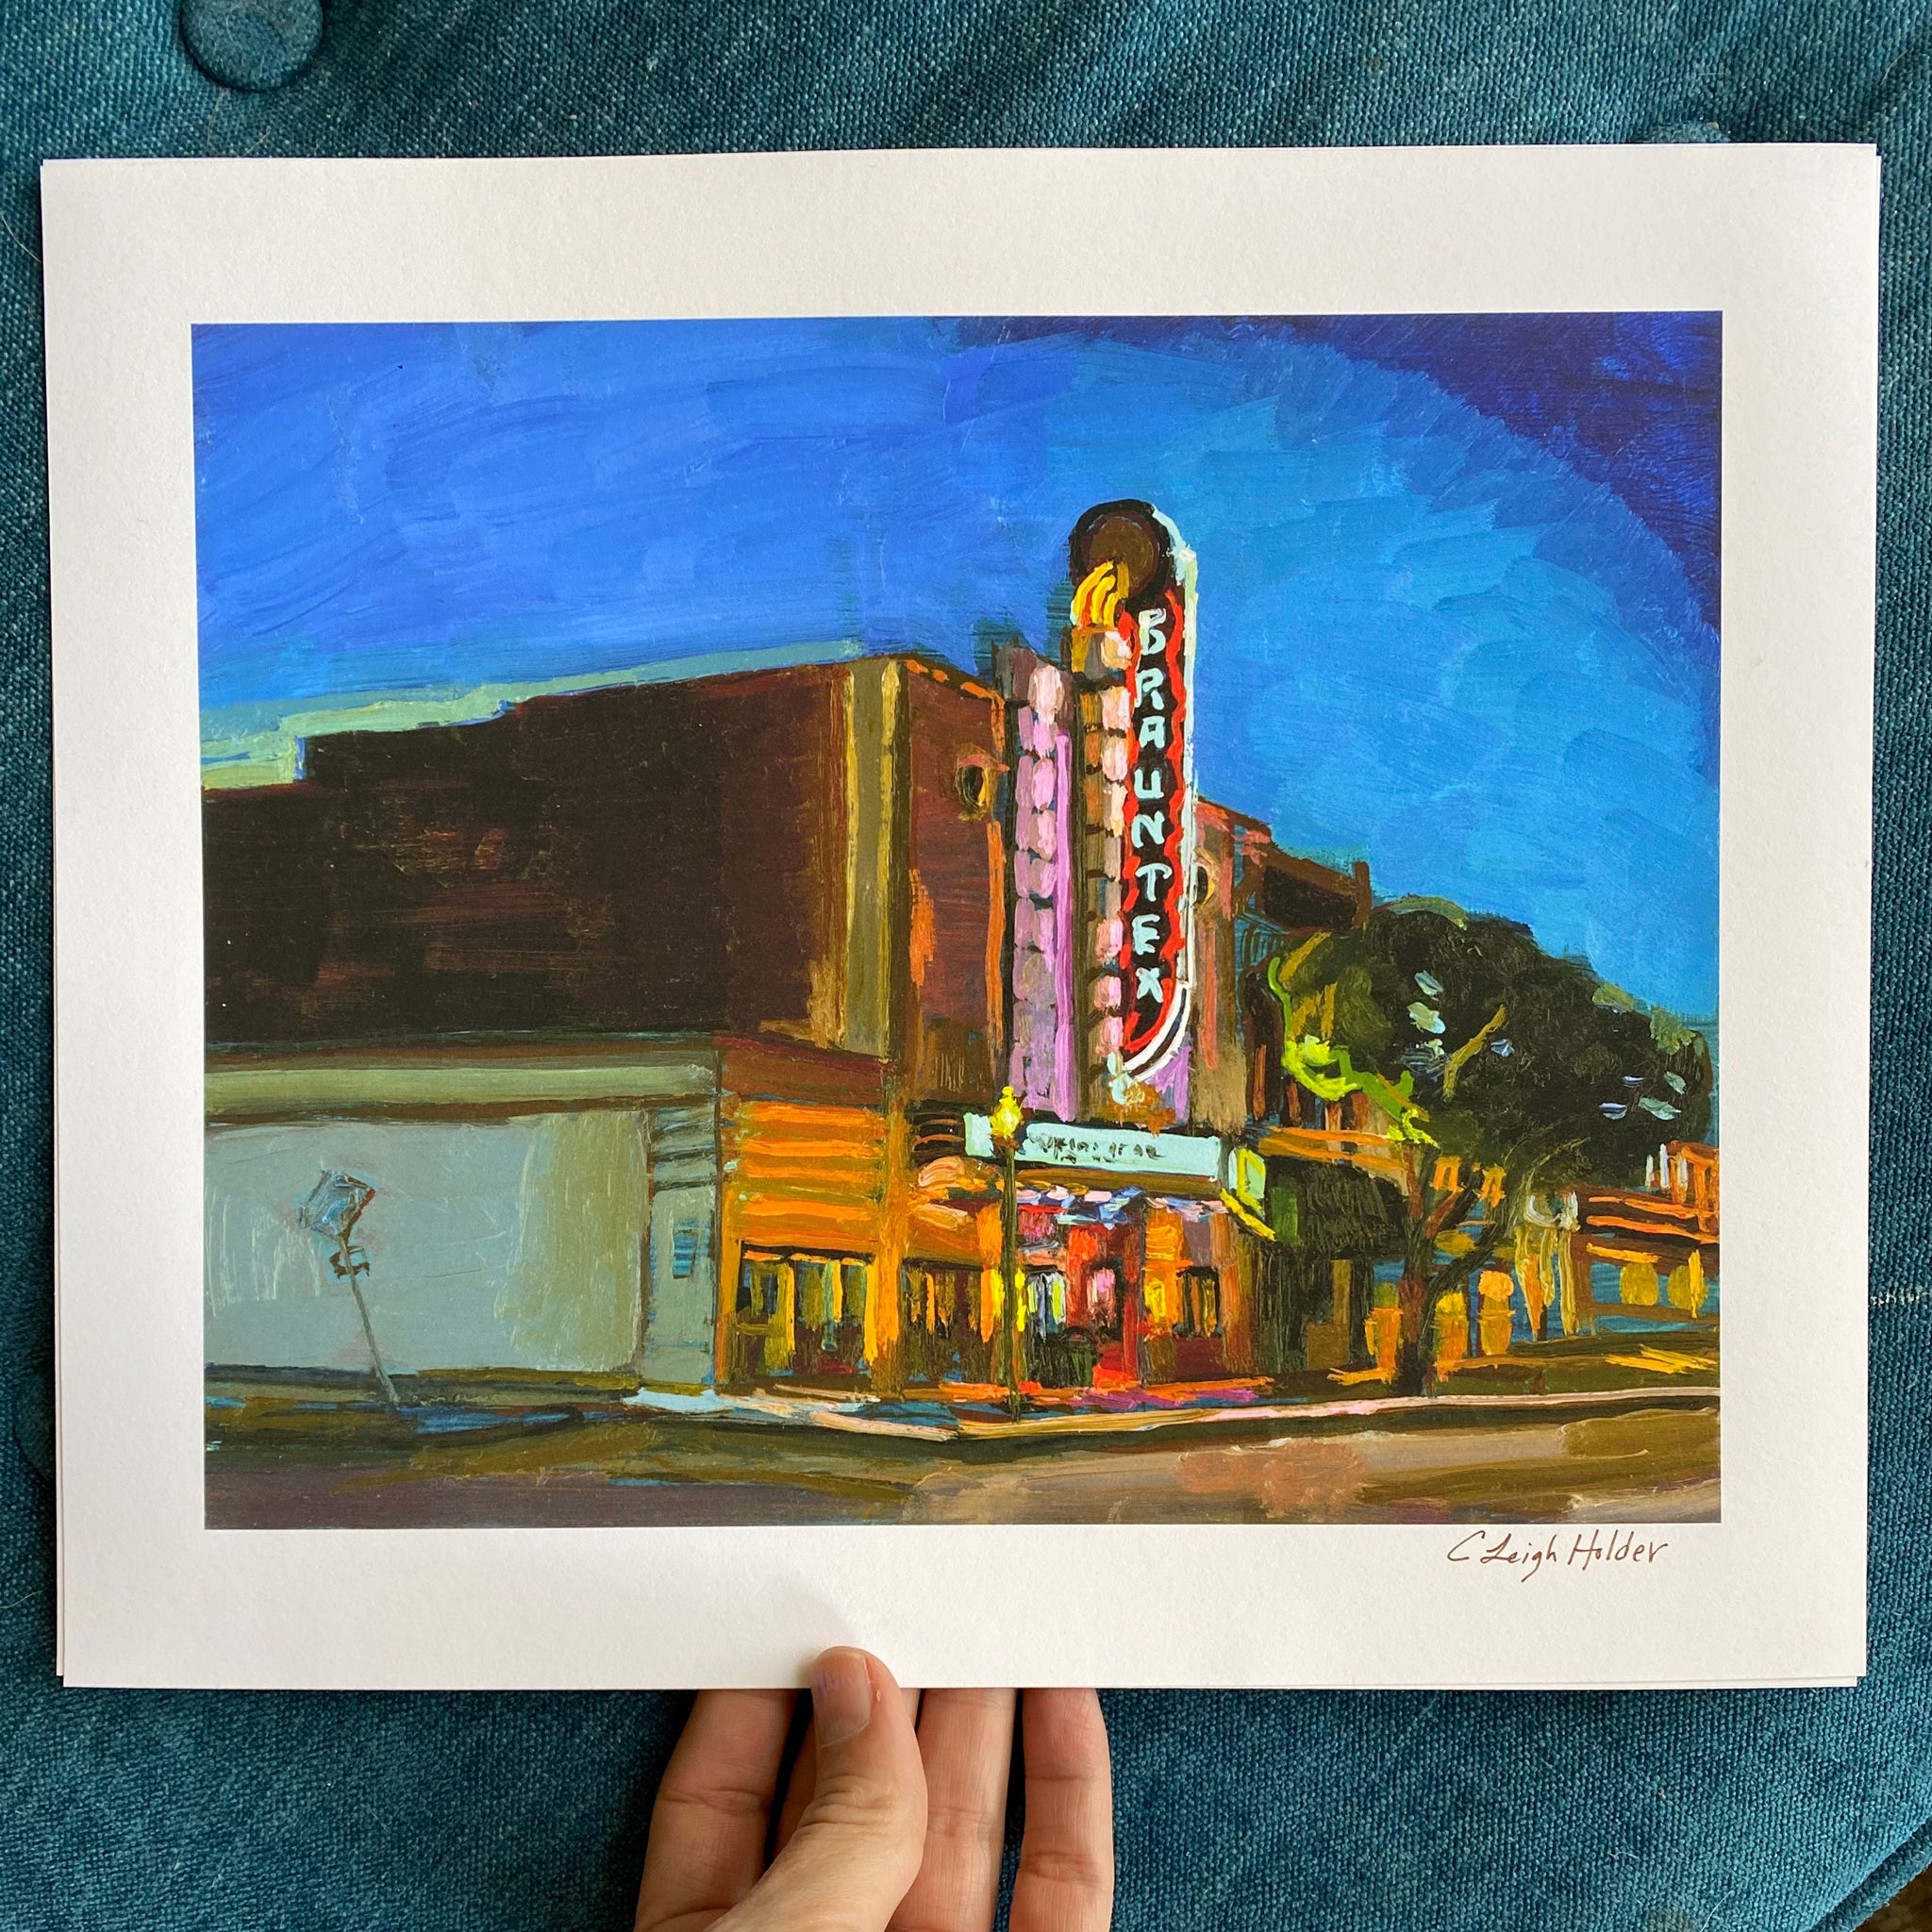 Cobalt Art Deco Art | signed print of painting of historic theatre with neon colors | Texas Wall Art | Austin Art Gift | Architecture Art